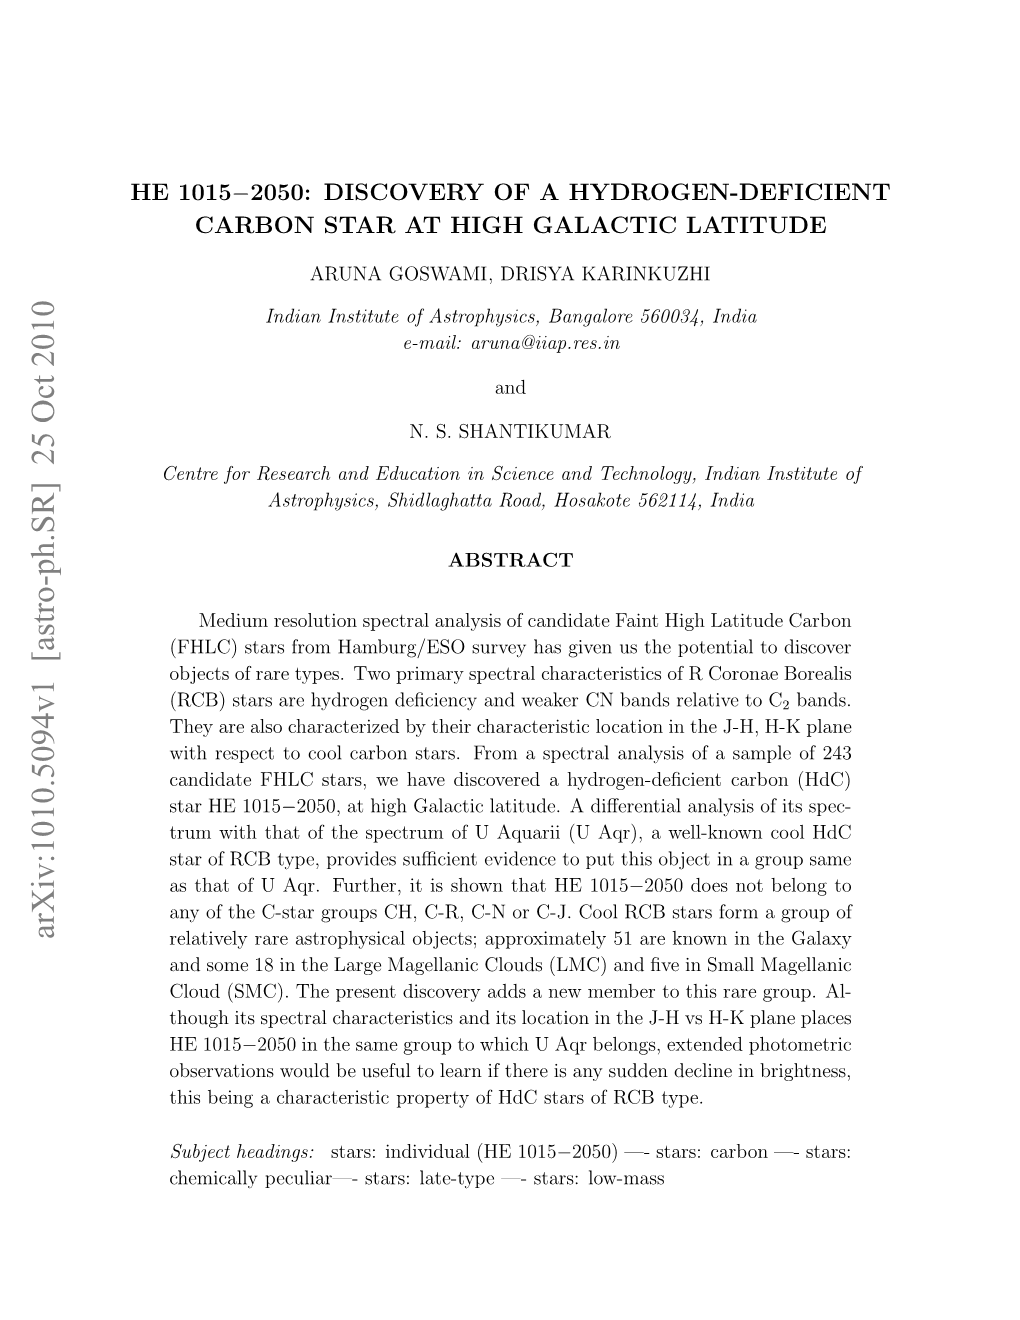 HE 1015-2050: Discovery of a Hydrogen-Deficient Carbon Star At